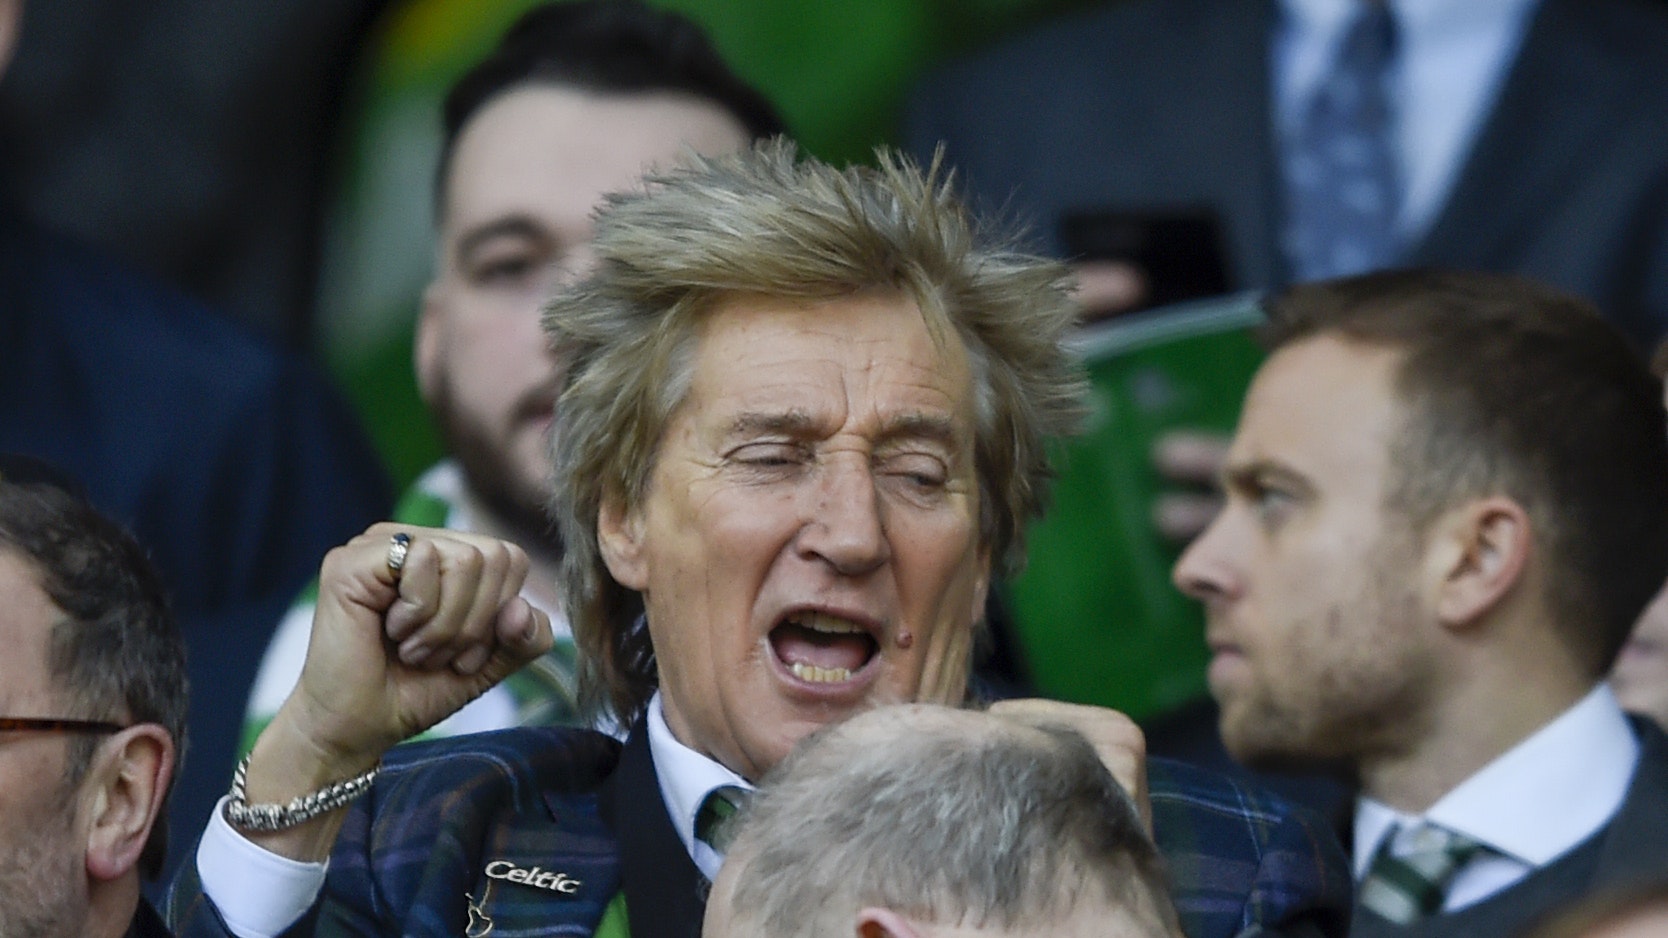 Sir Rod Stewart faces backlash from angry Celtic fans after Johnson tweet | BT